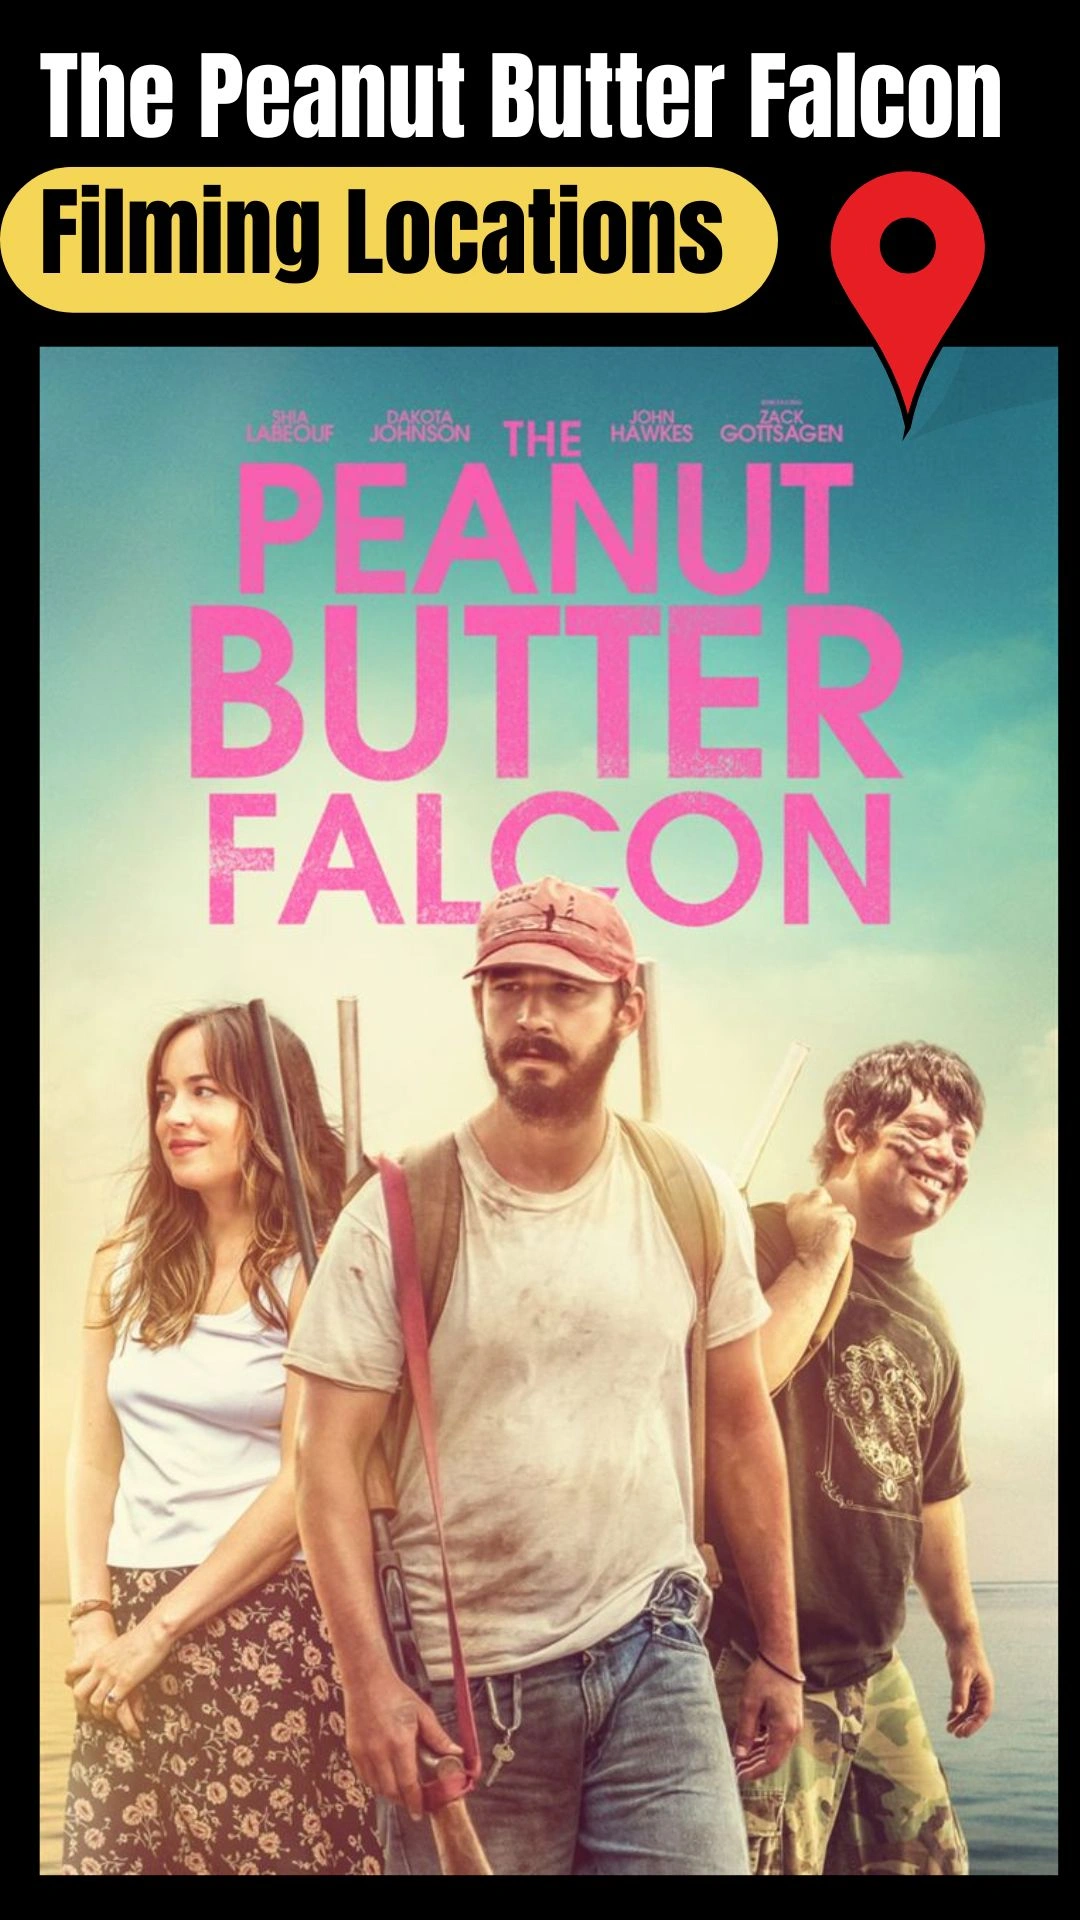 The Peanut Butter Falcon Filming Locations